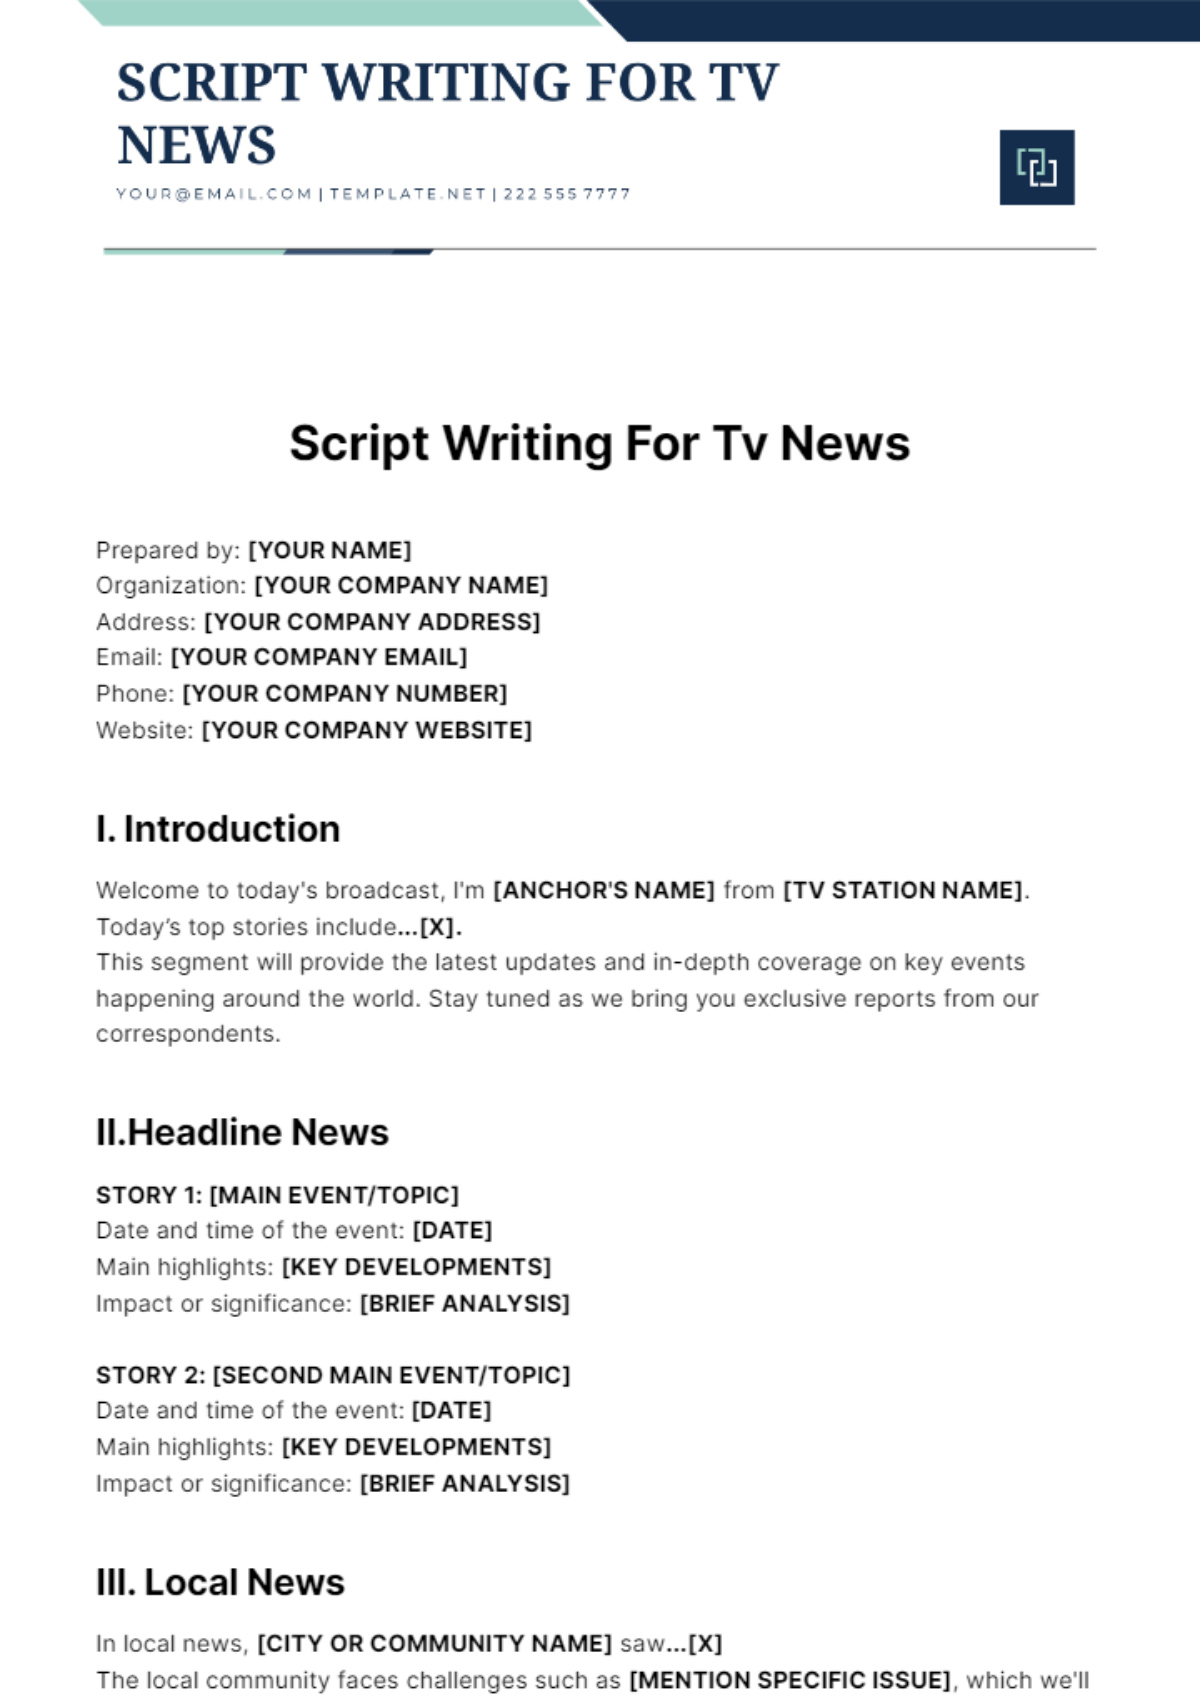 Free Script Writing For Tv News Template